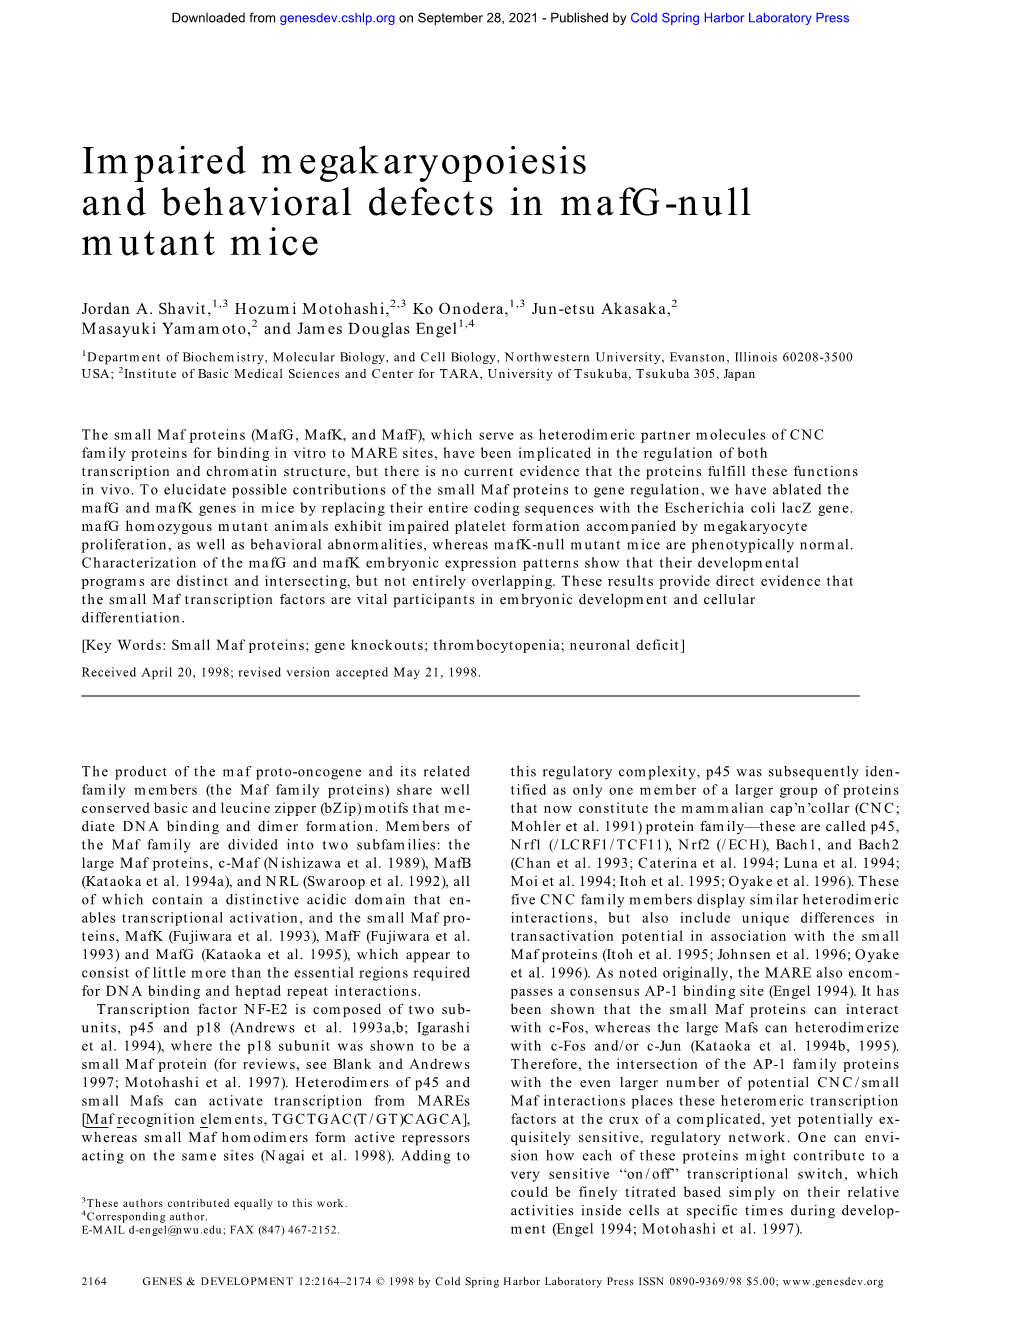 Impaired Megakaryopoiesis and Behavioral Defects in Mafg-Null Mutant Mice